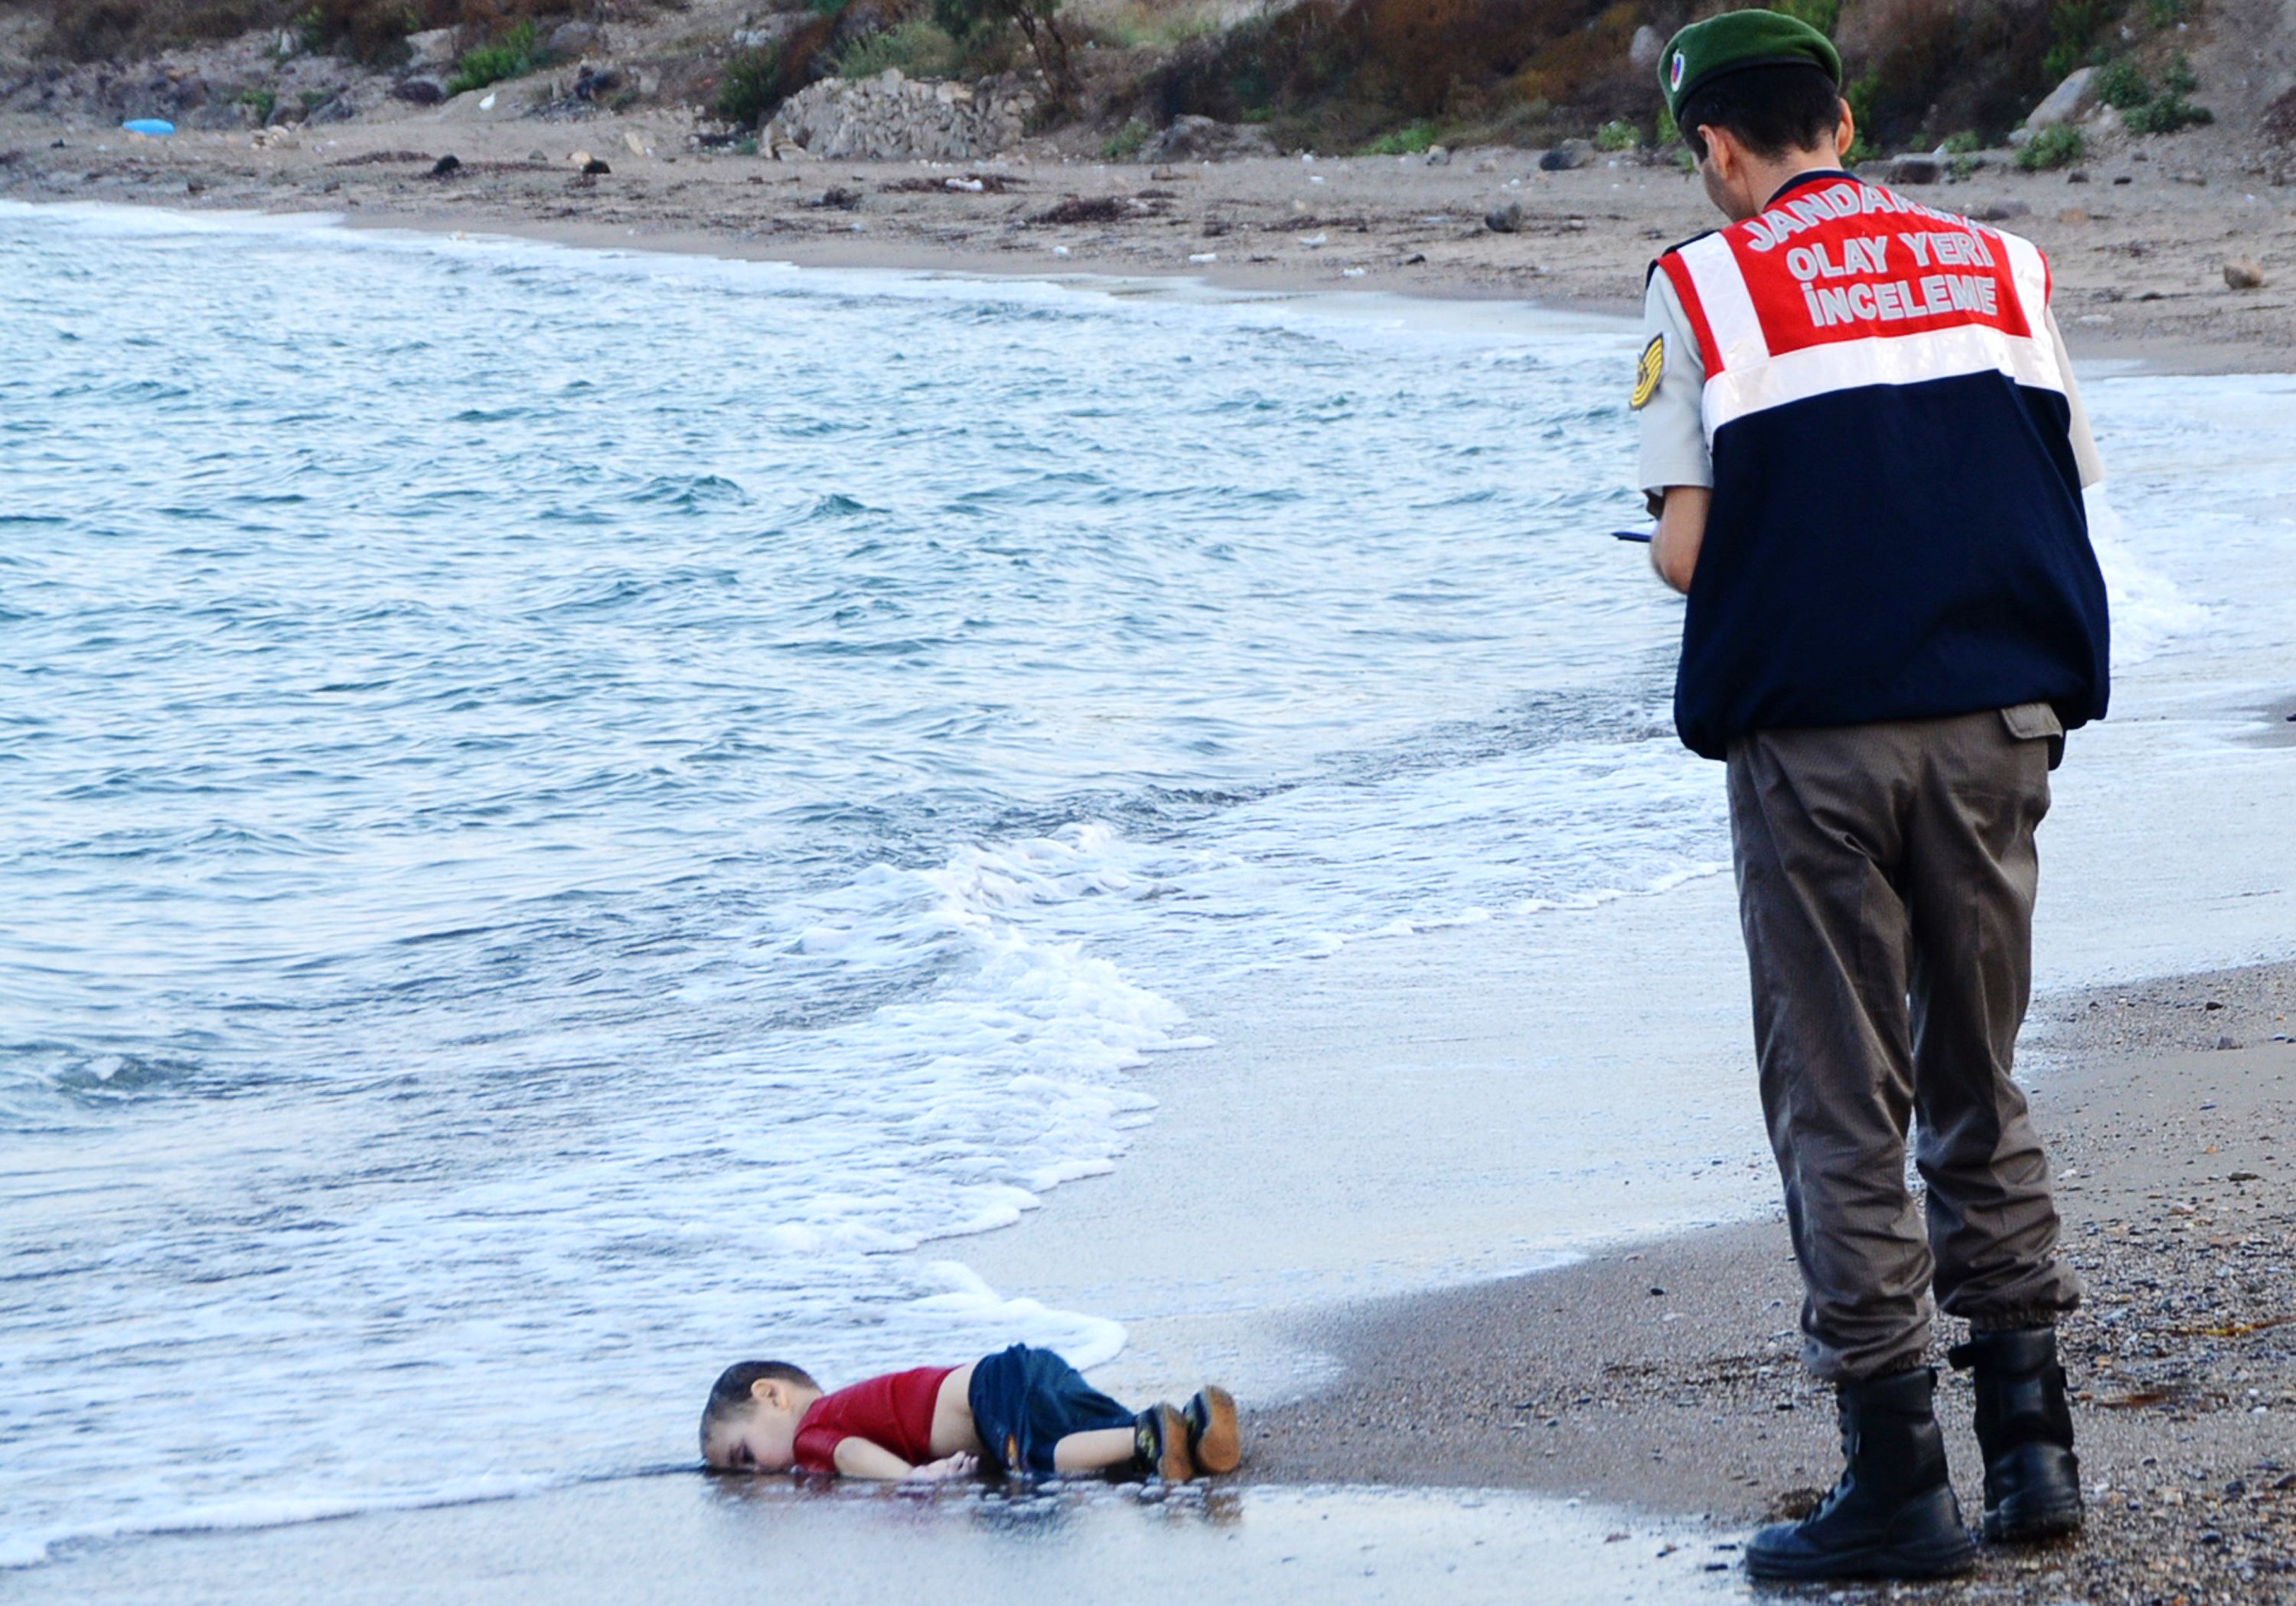 GRAPHIC CONTENT A Turkish police officer stands next to a migrant child's dead body off the shores in Bodrum, southern Turkey, on September 2, 2015 after a boat carrying refugees sank while reaching the Greek island of Kos. Thousands of refugees and migrants arrived in Athens on September 2, as Greek ministers held talks on the crisis, with Europe struggling to cope with the huge influx fleeing war and repression in the Middle East and Africa. AFP PHOTO / Nilufer Demir / DOGAN NEWS AGENCY = TURKEY OUT =